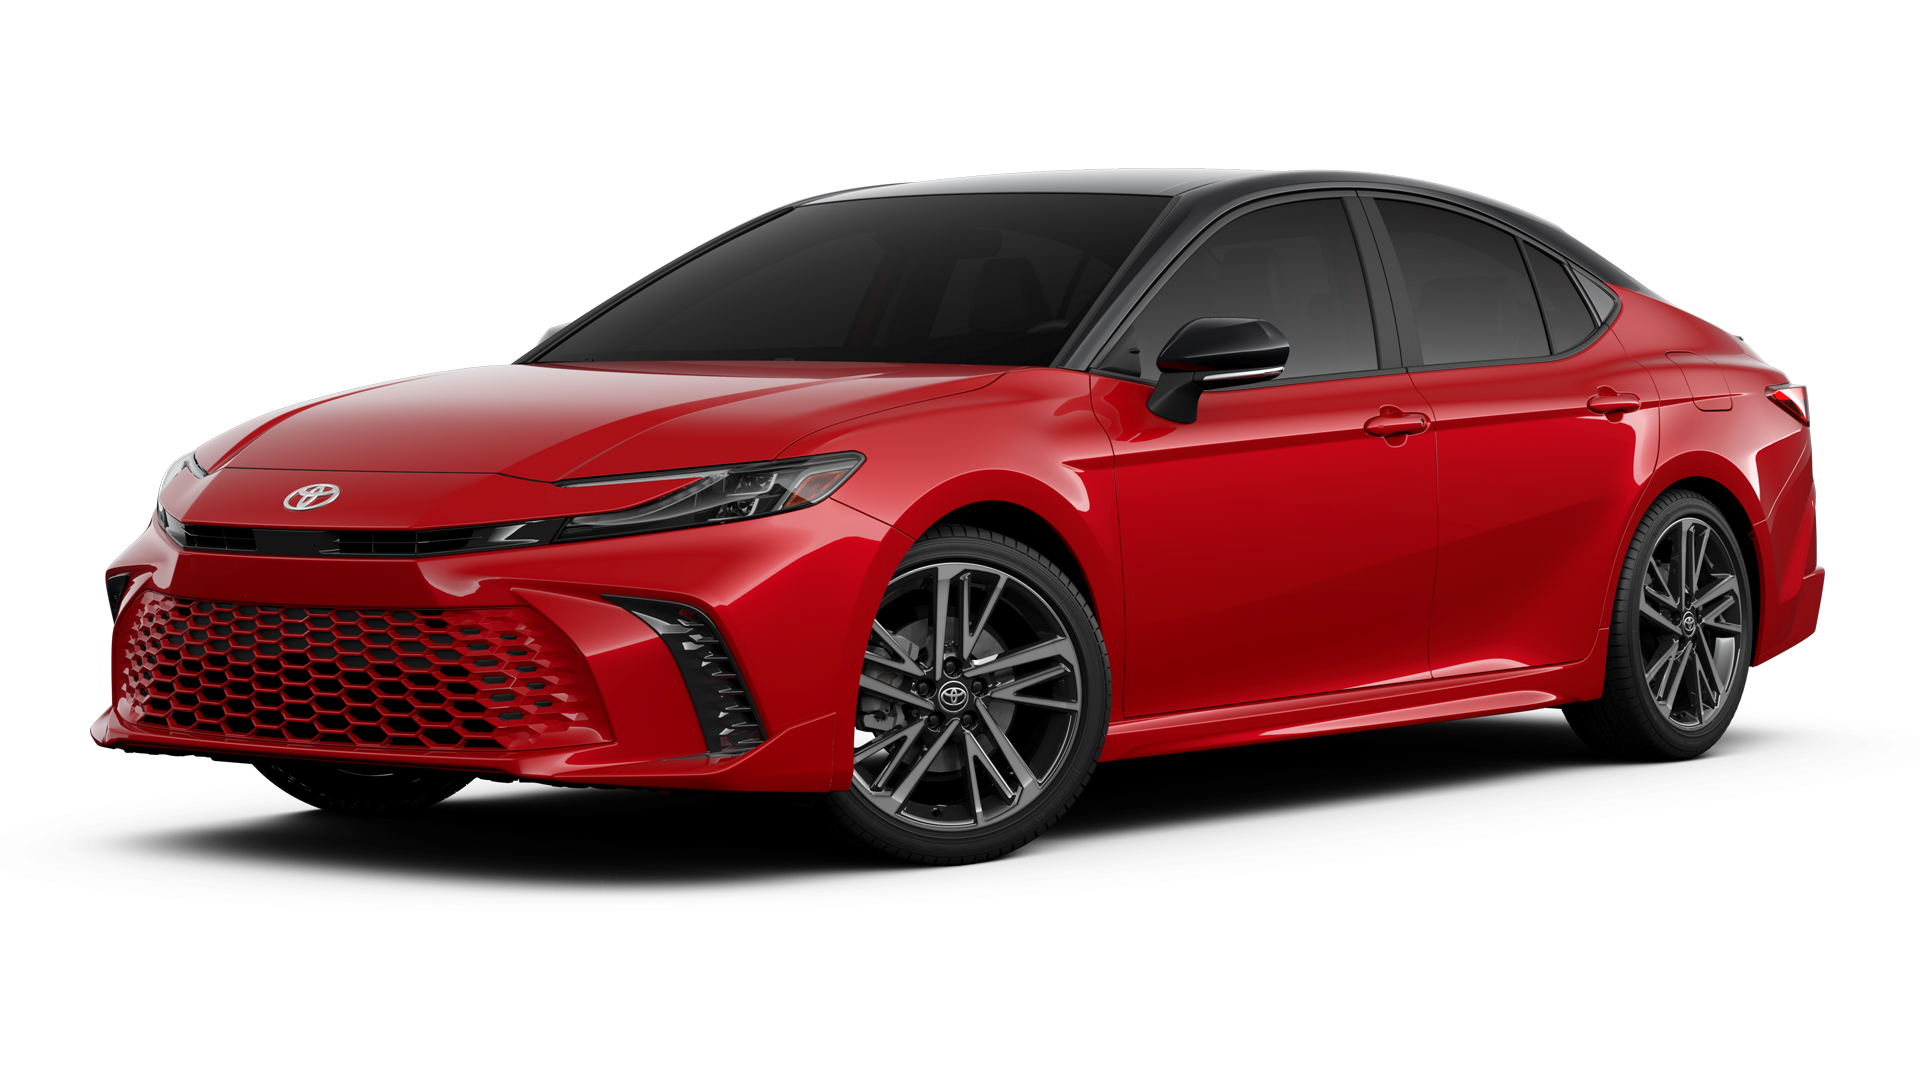 2025 Toyota Camry in Supersonic Red/Midnight Black Metallic Roof*.